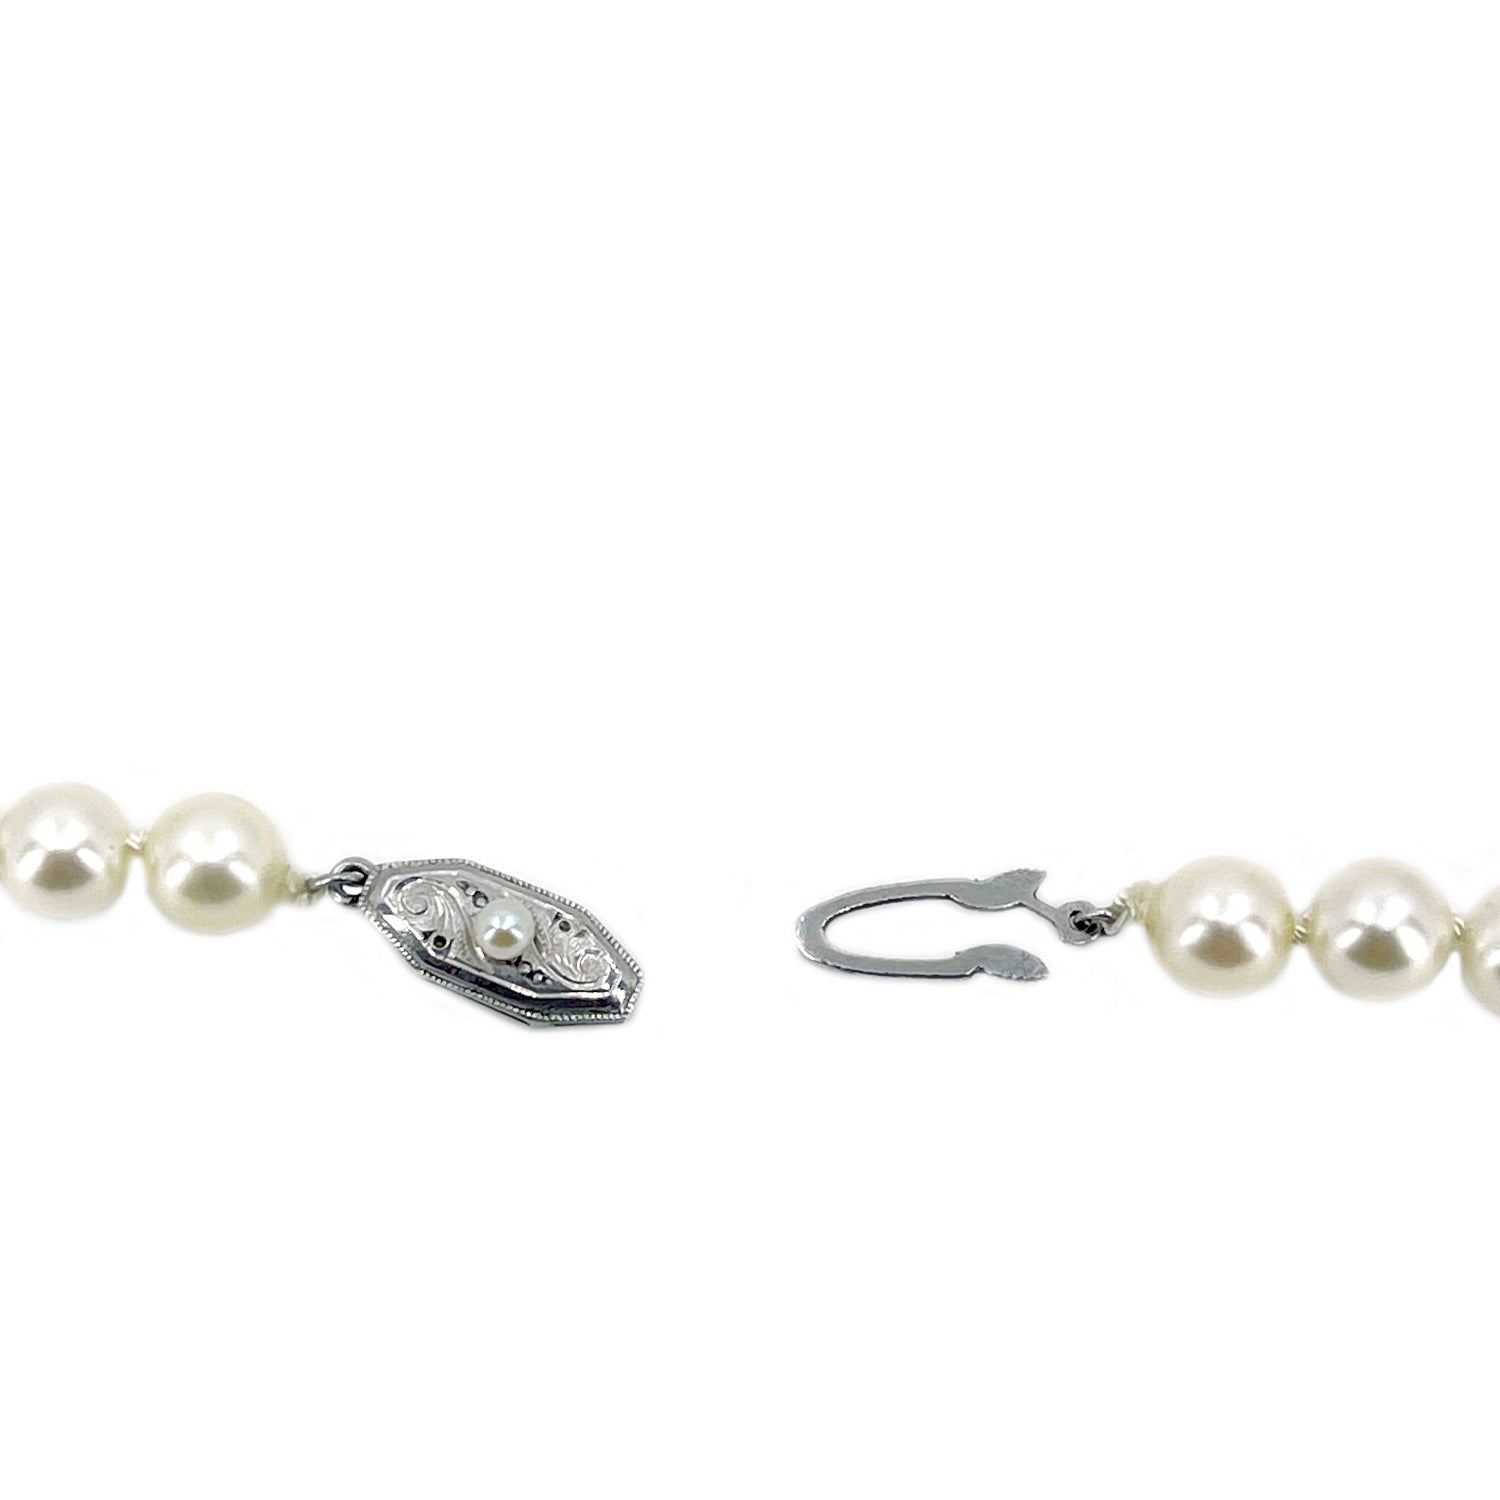 Opera Art Deco Engraved Japanese Saltwater Cultured Akoya Pearl Vintage Necklace - Sterling Silver 30 Inch